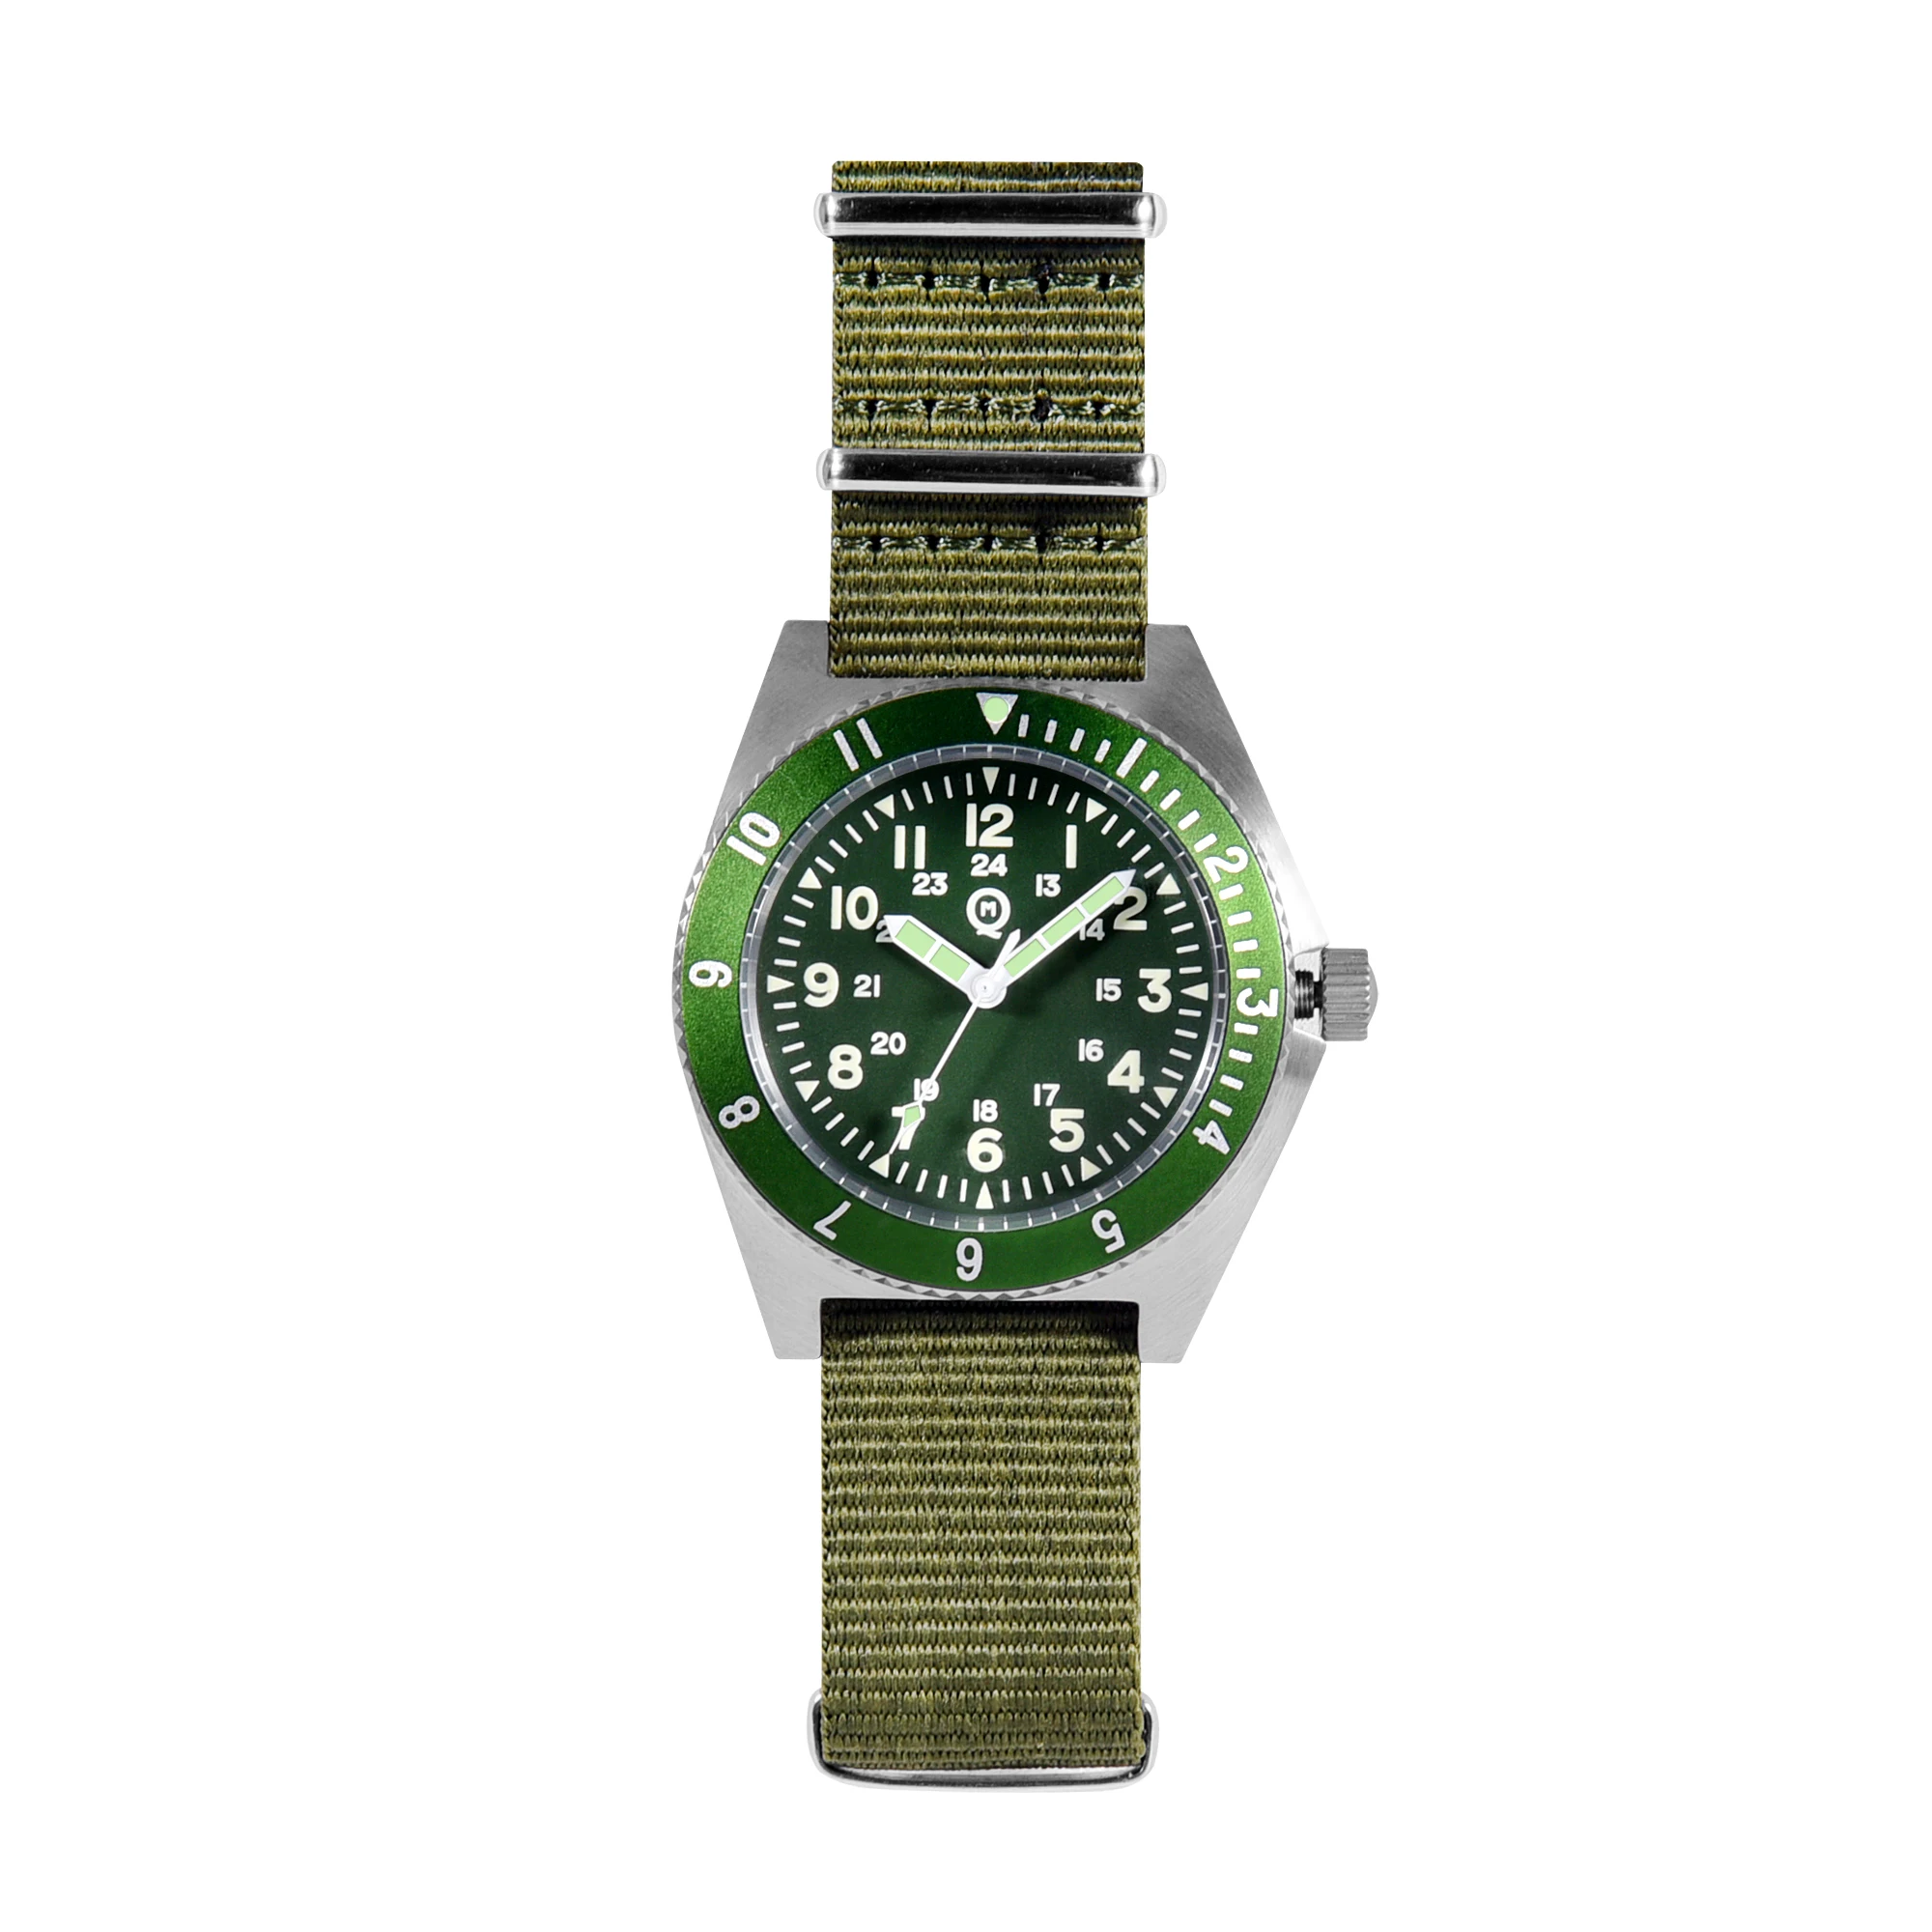 QIMEI Design US Special Forces UDT Army Military 300M  Diver Outdoor Sports Men's Wrist Watch c3 Luminous SM8019B men s tactical special forces army camouflage frog suit pioneer outdoor large wear resistant special training suit training suit